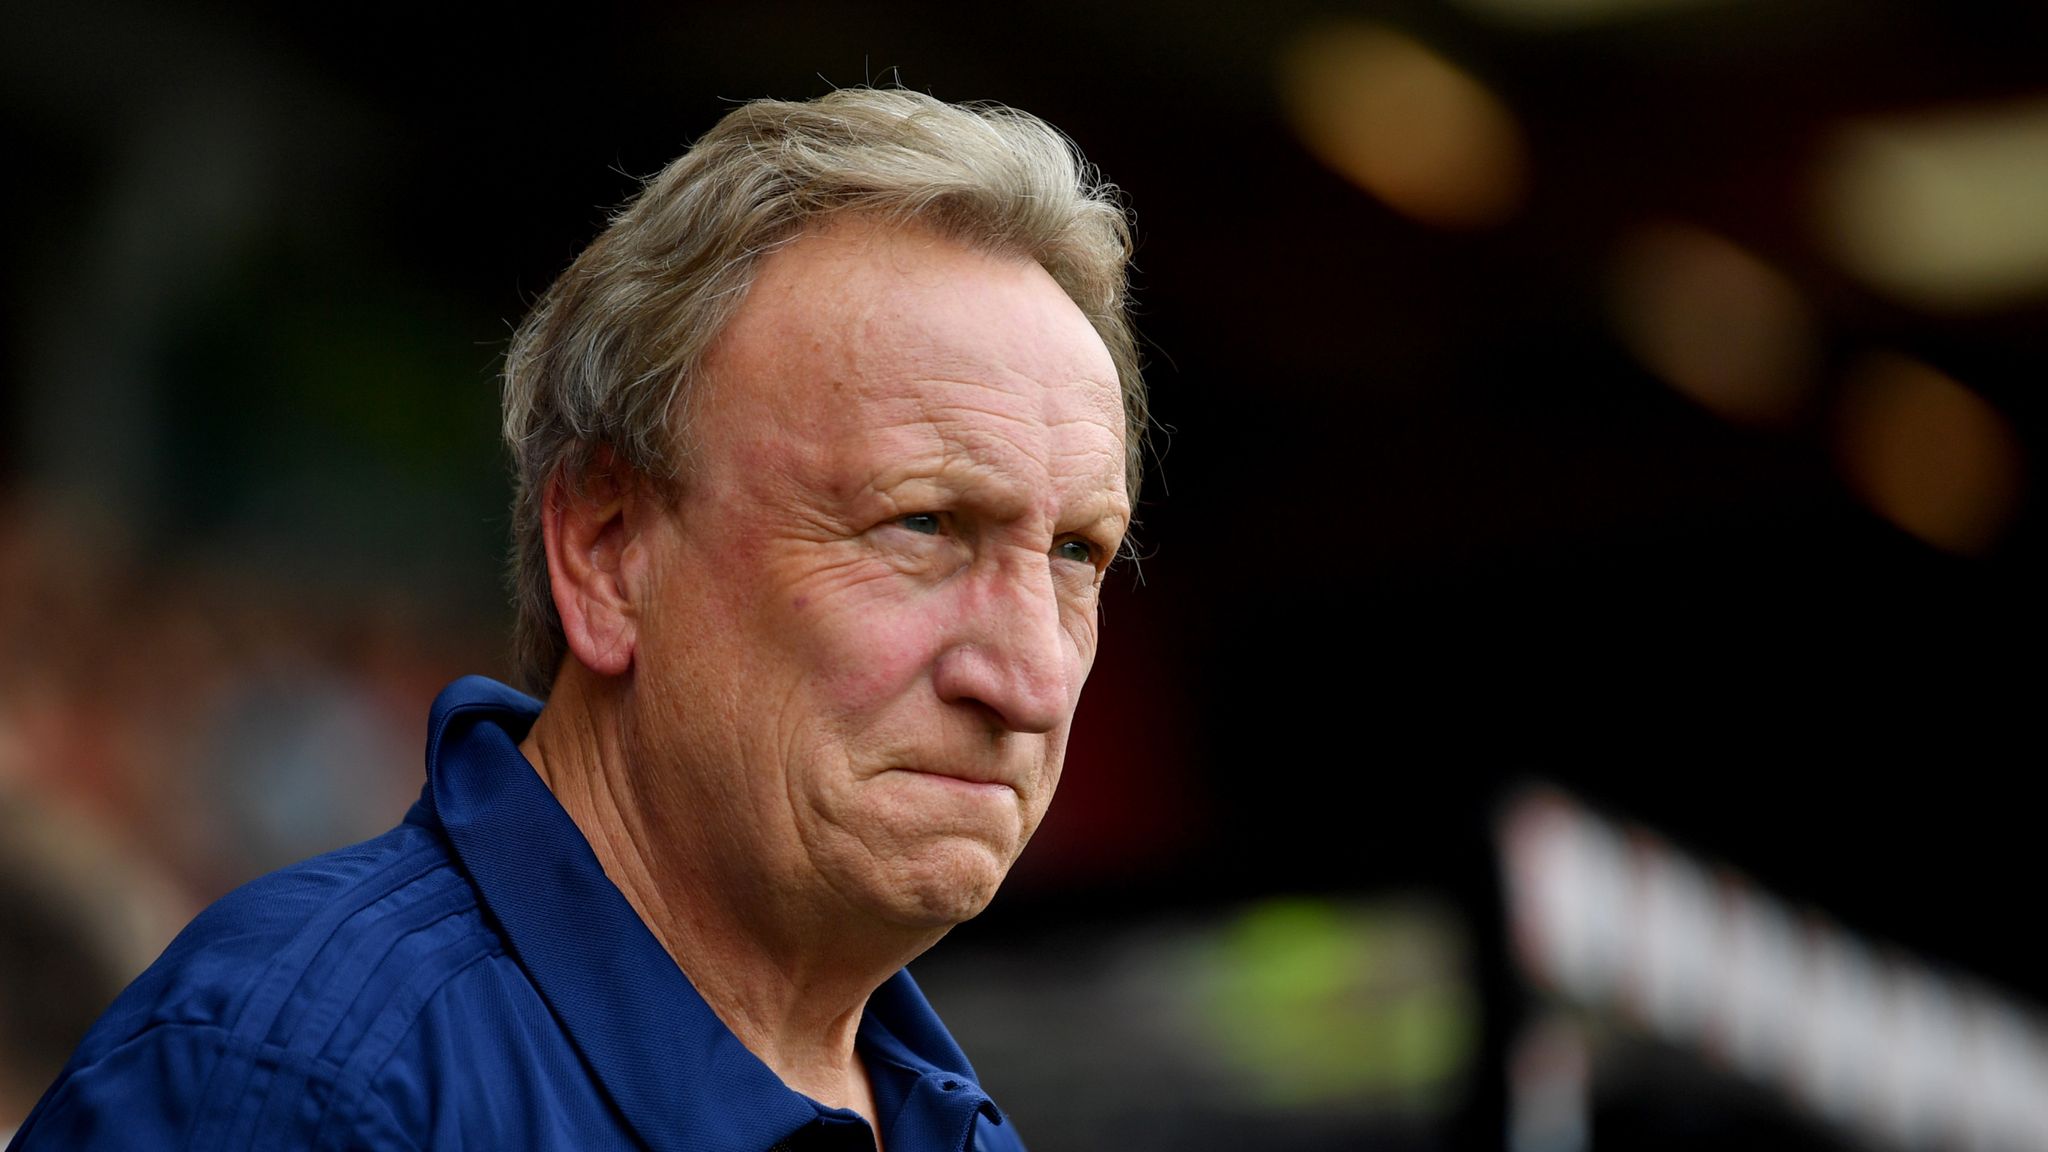 Cardiff boss Neil Warnock envious of Fulham riches | Football News ...